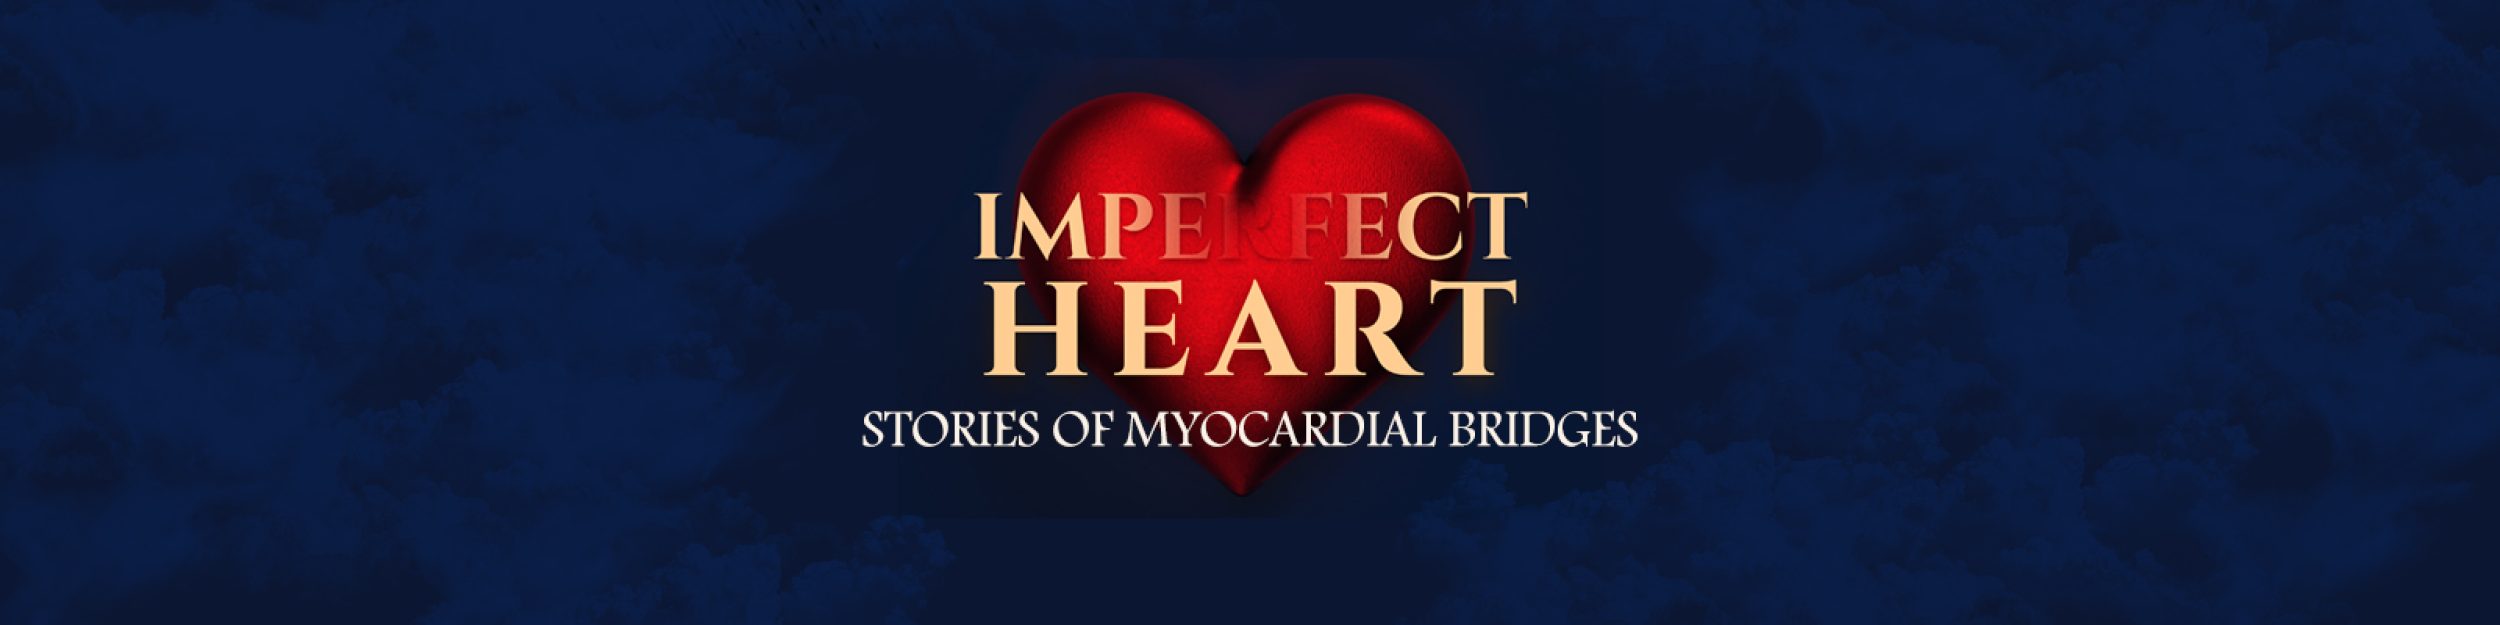 My Imperfect Heart